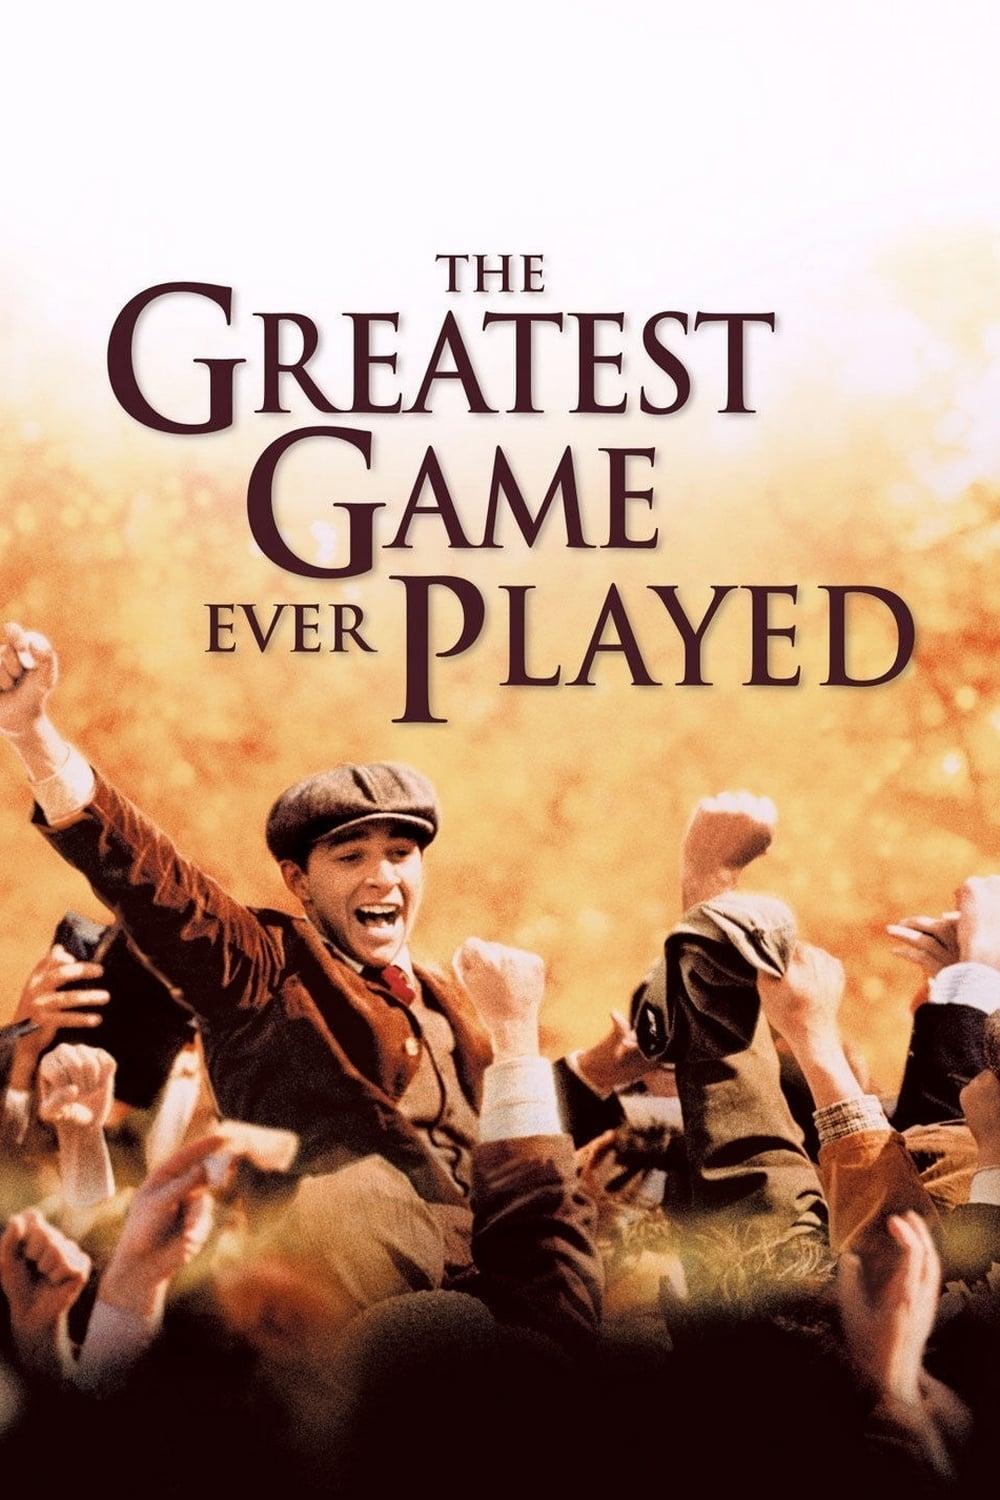 The Greatest Game Ever Played poster